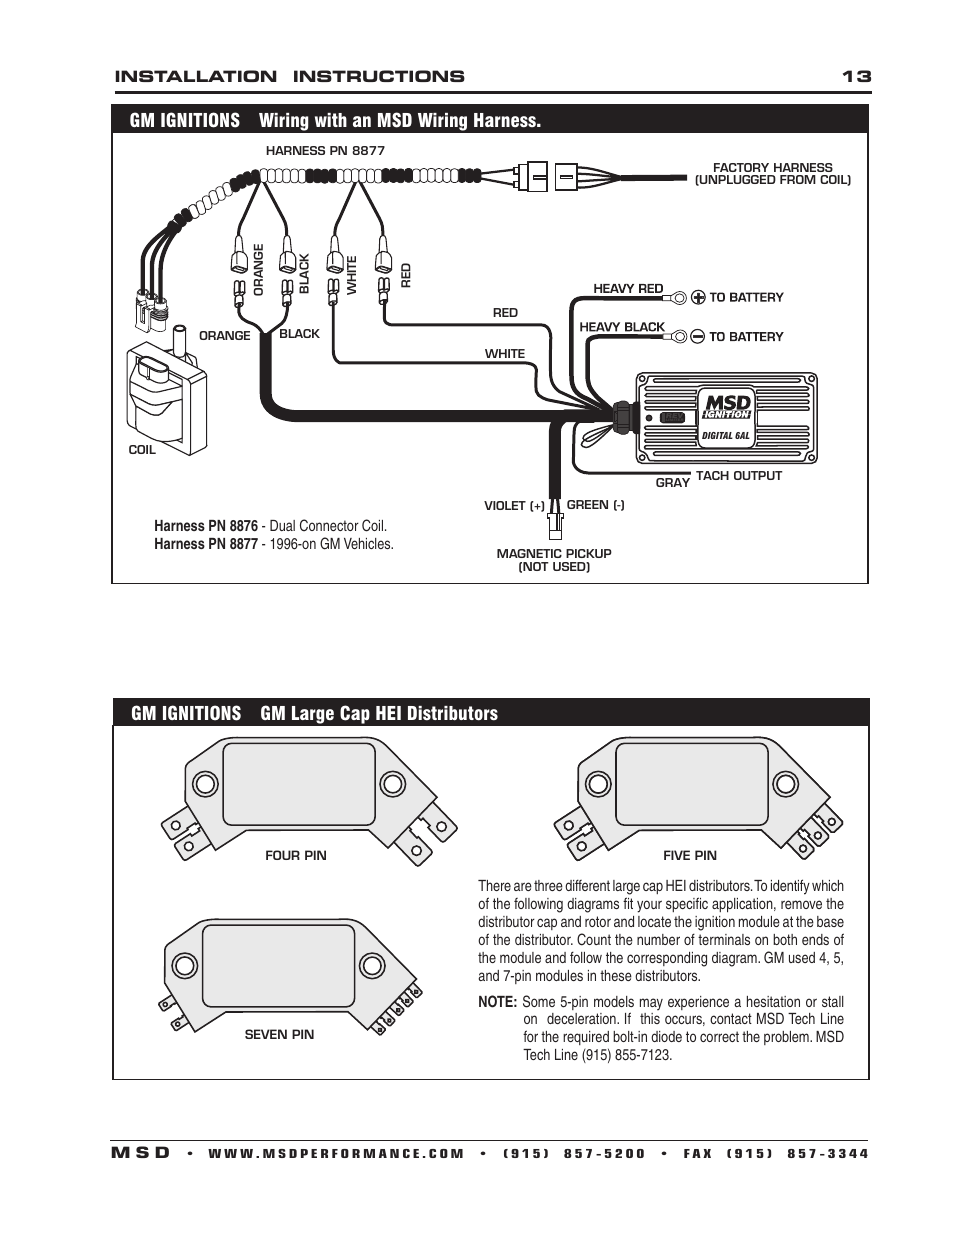 Msd 6A Box Wiring Diagram from wiringall.com